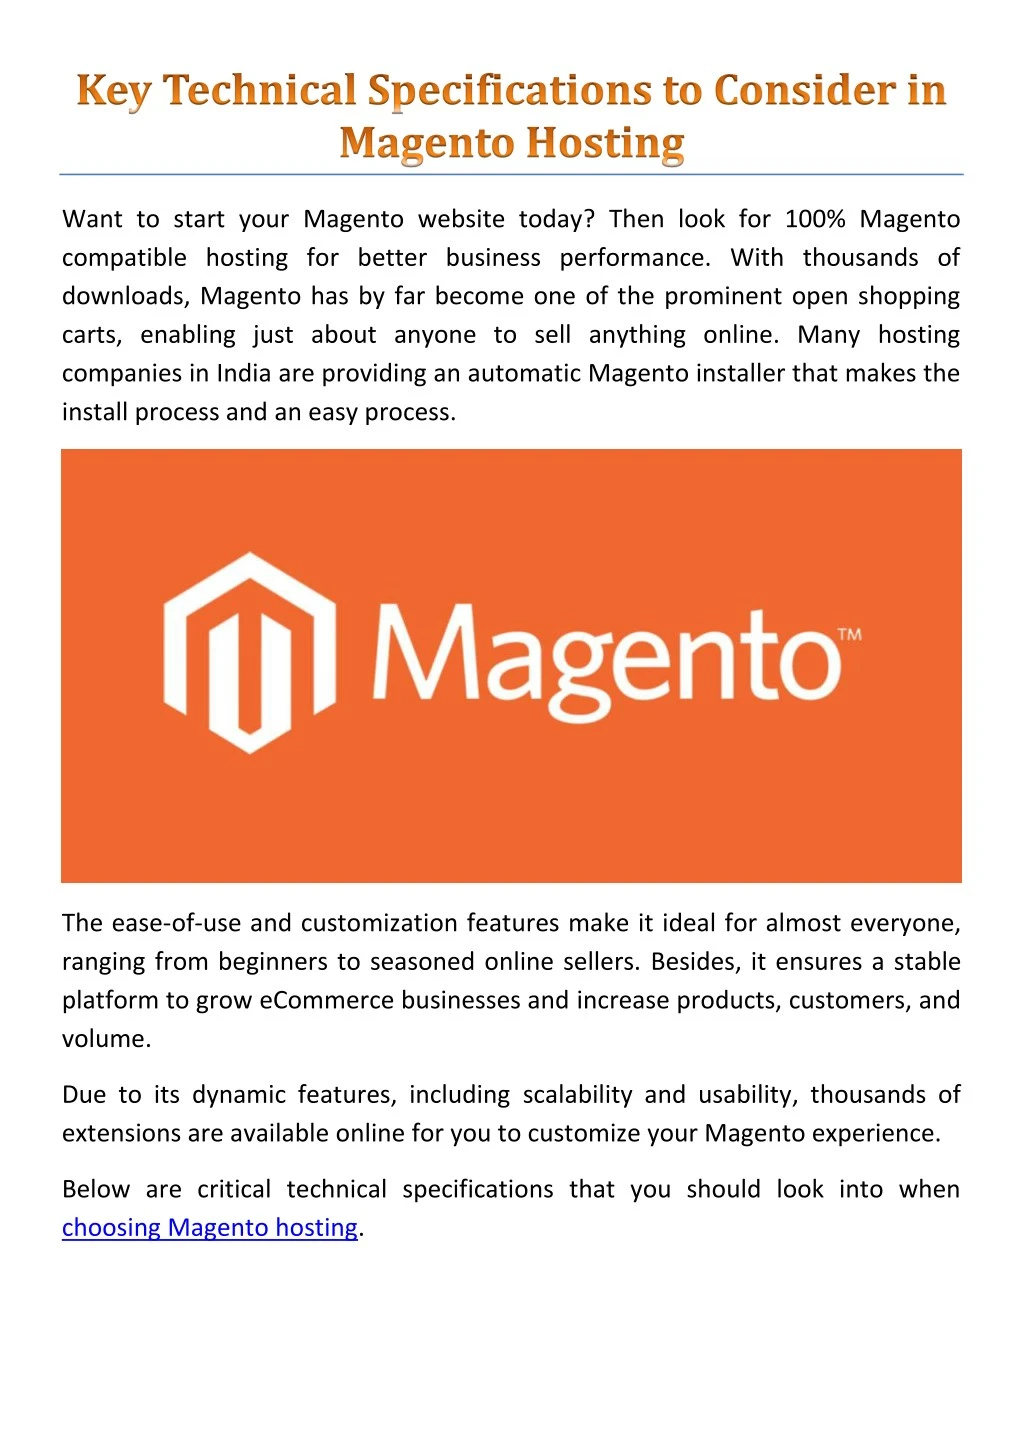 want to start your magento website today then